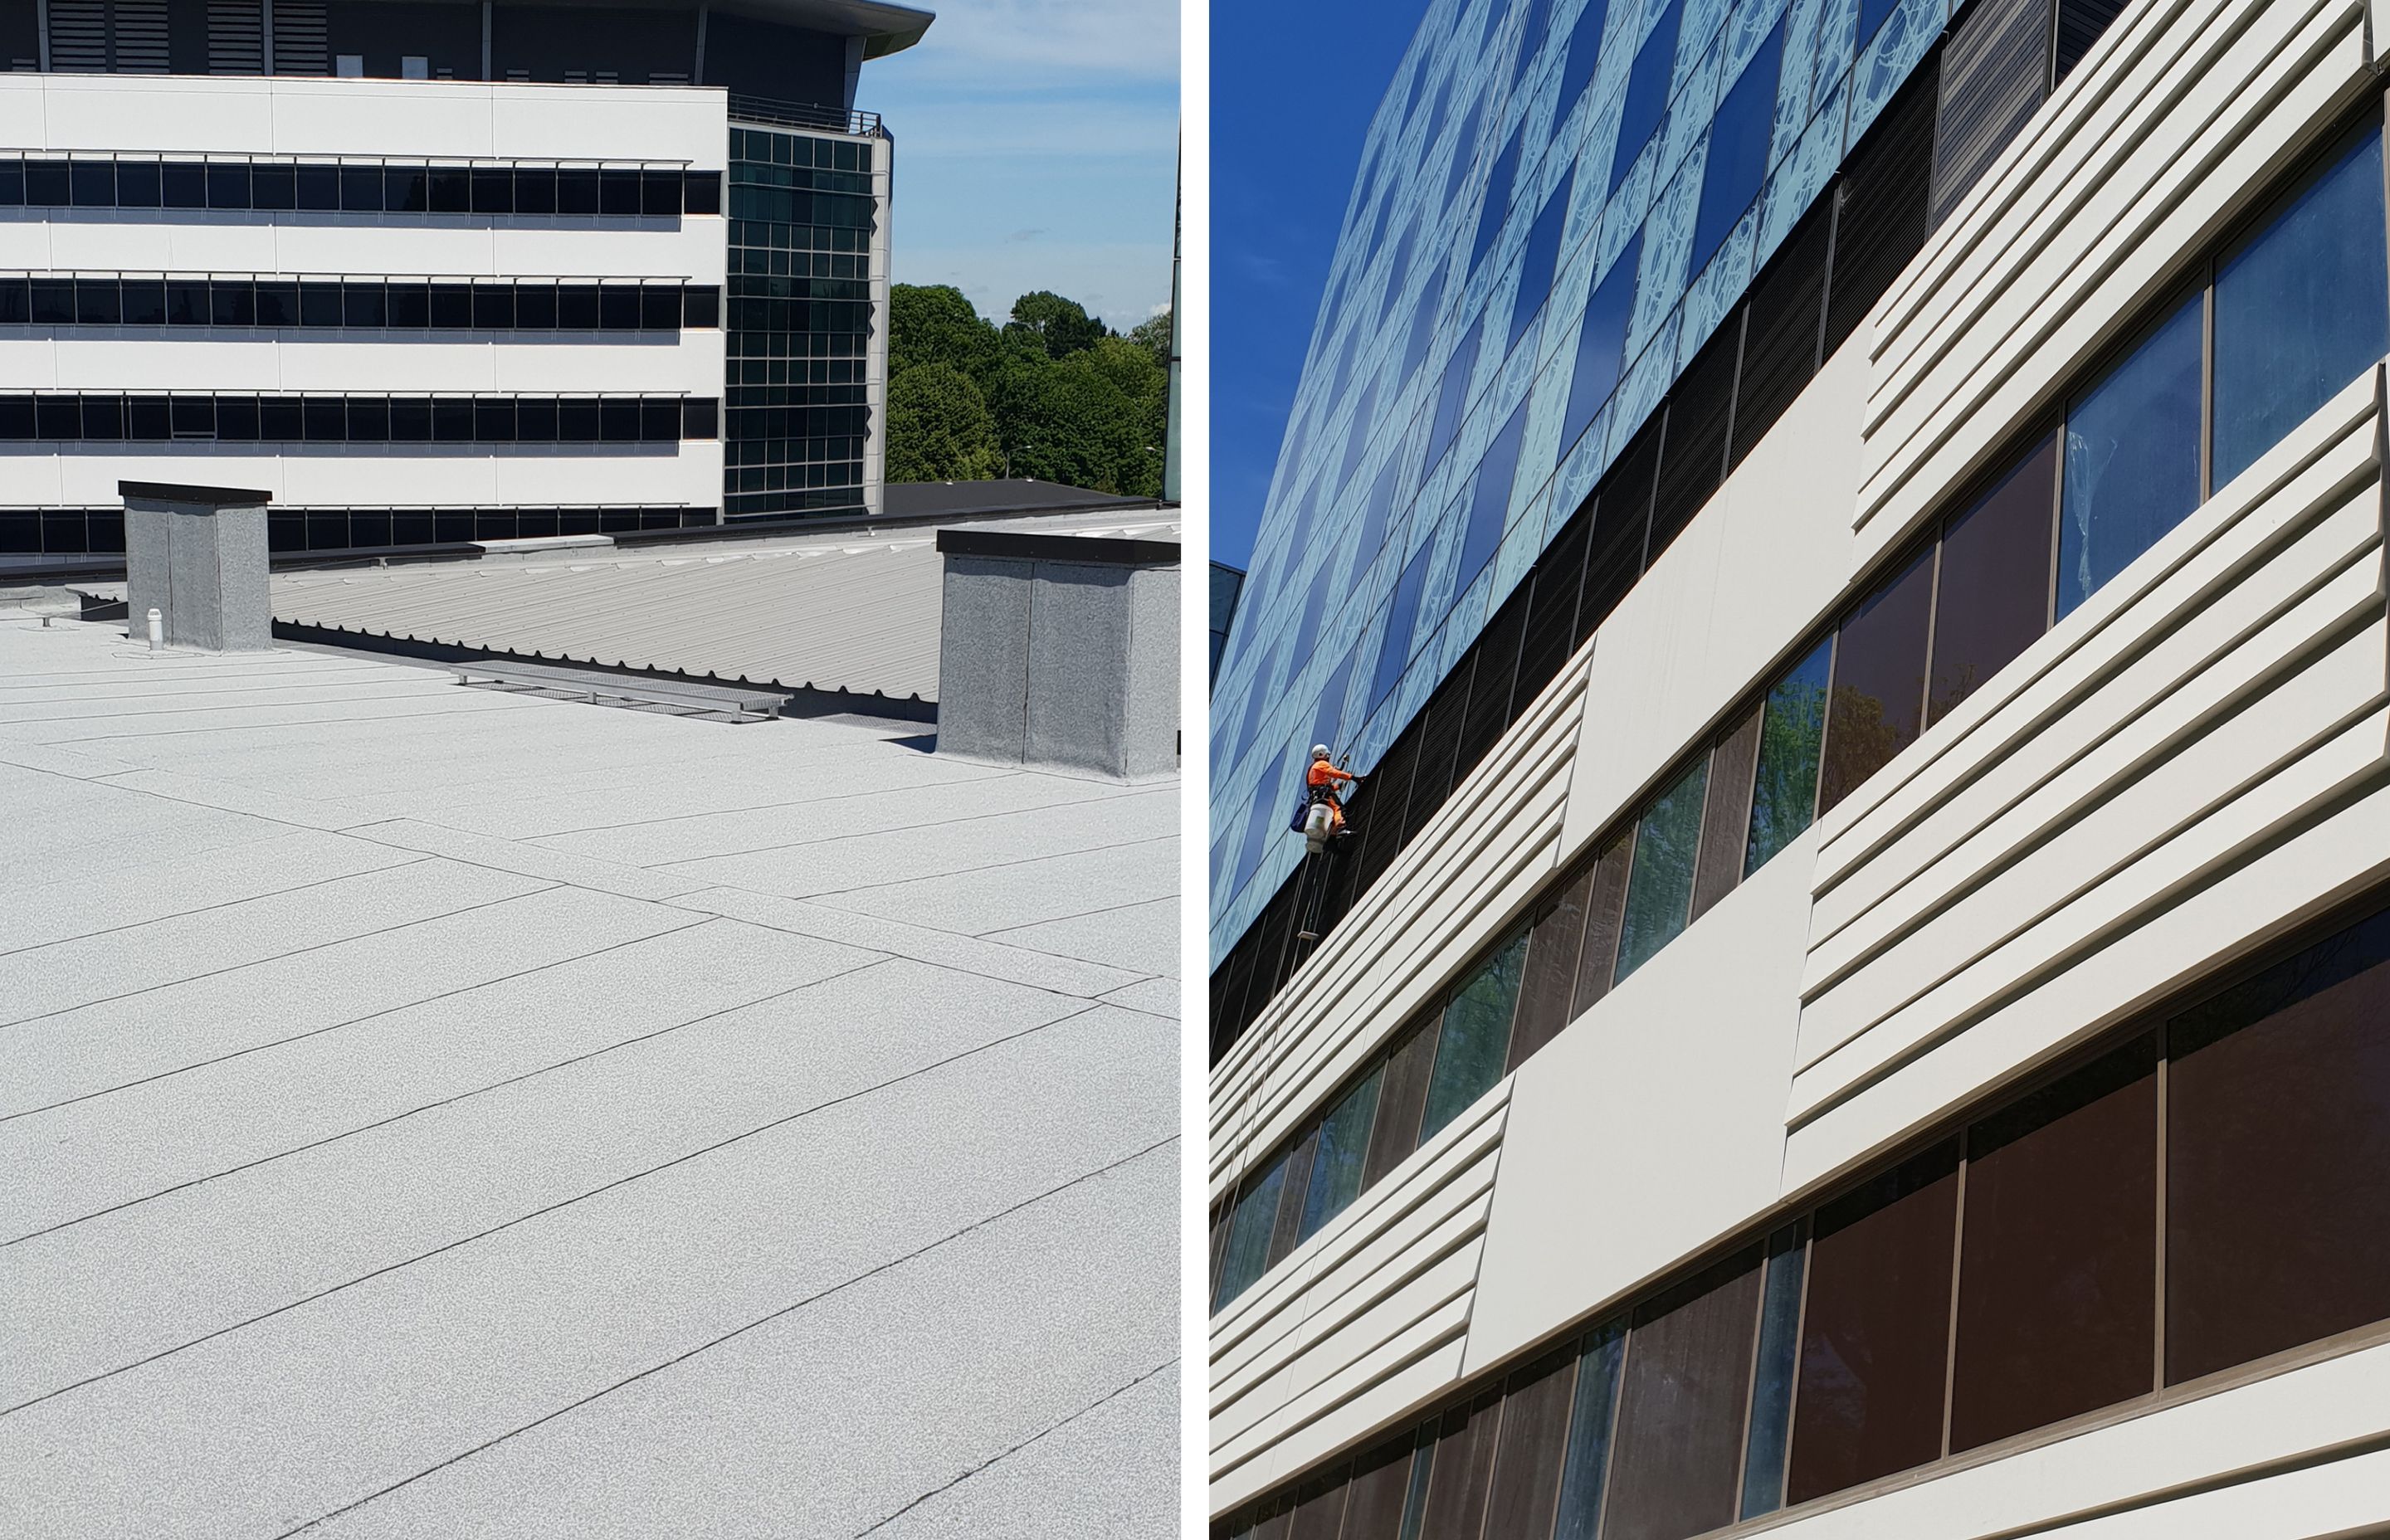 Equus Soprema DuO (left) is a 4mm, single-layer flexible waterproofing membrane system with integrated vapour distribution capacity allowing trapped vapour to expand without bubbling. Keim Granital (right) is an extremely long-life, silicate-based exterio